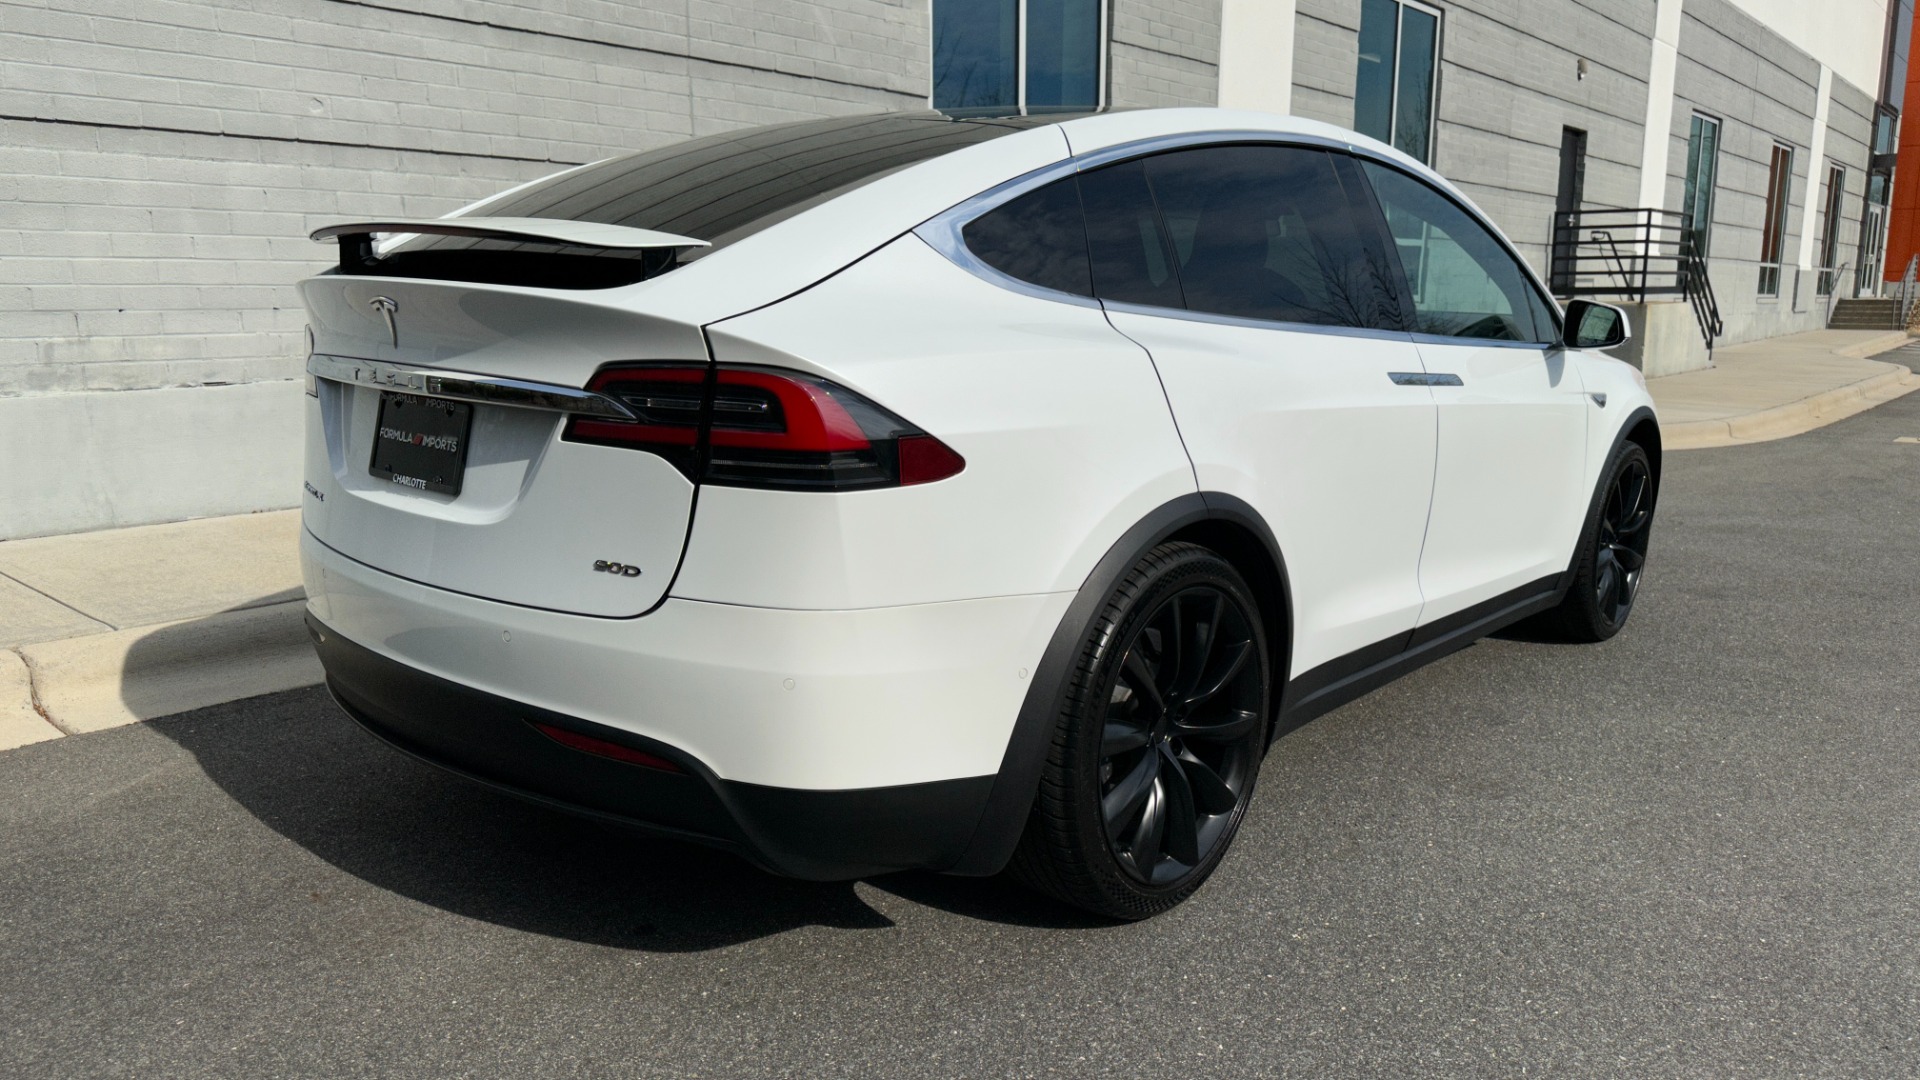 Used 2016 Tesla Model X 90D / HIGHWAY AUTOPILOT / LEATHER / 3RD ROW / CAPTAIN CHAIRS for sale $55,400 at Formula Imports in Charlotte NC 28227 7